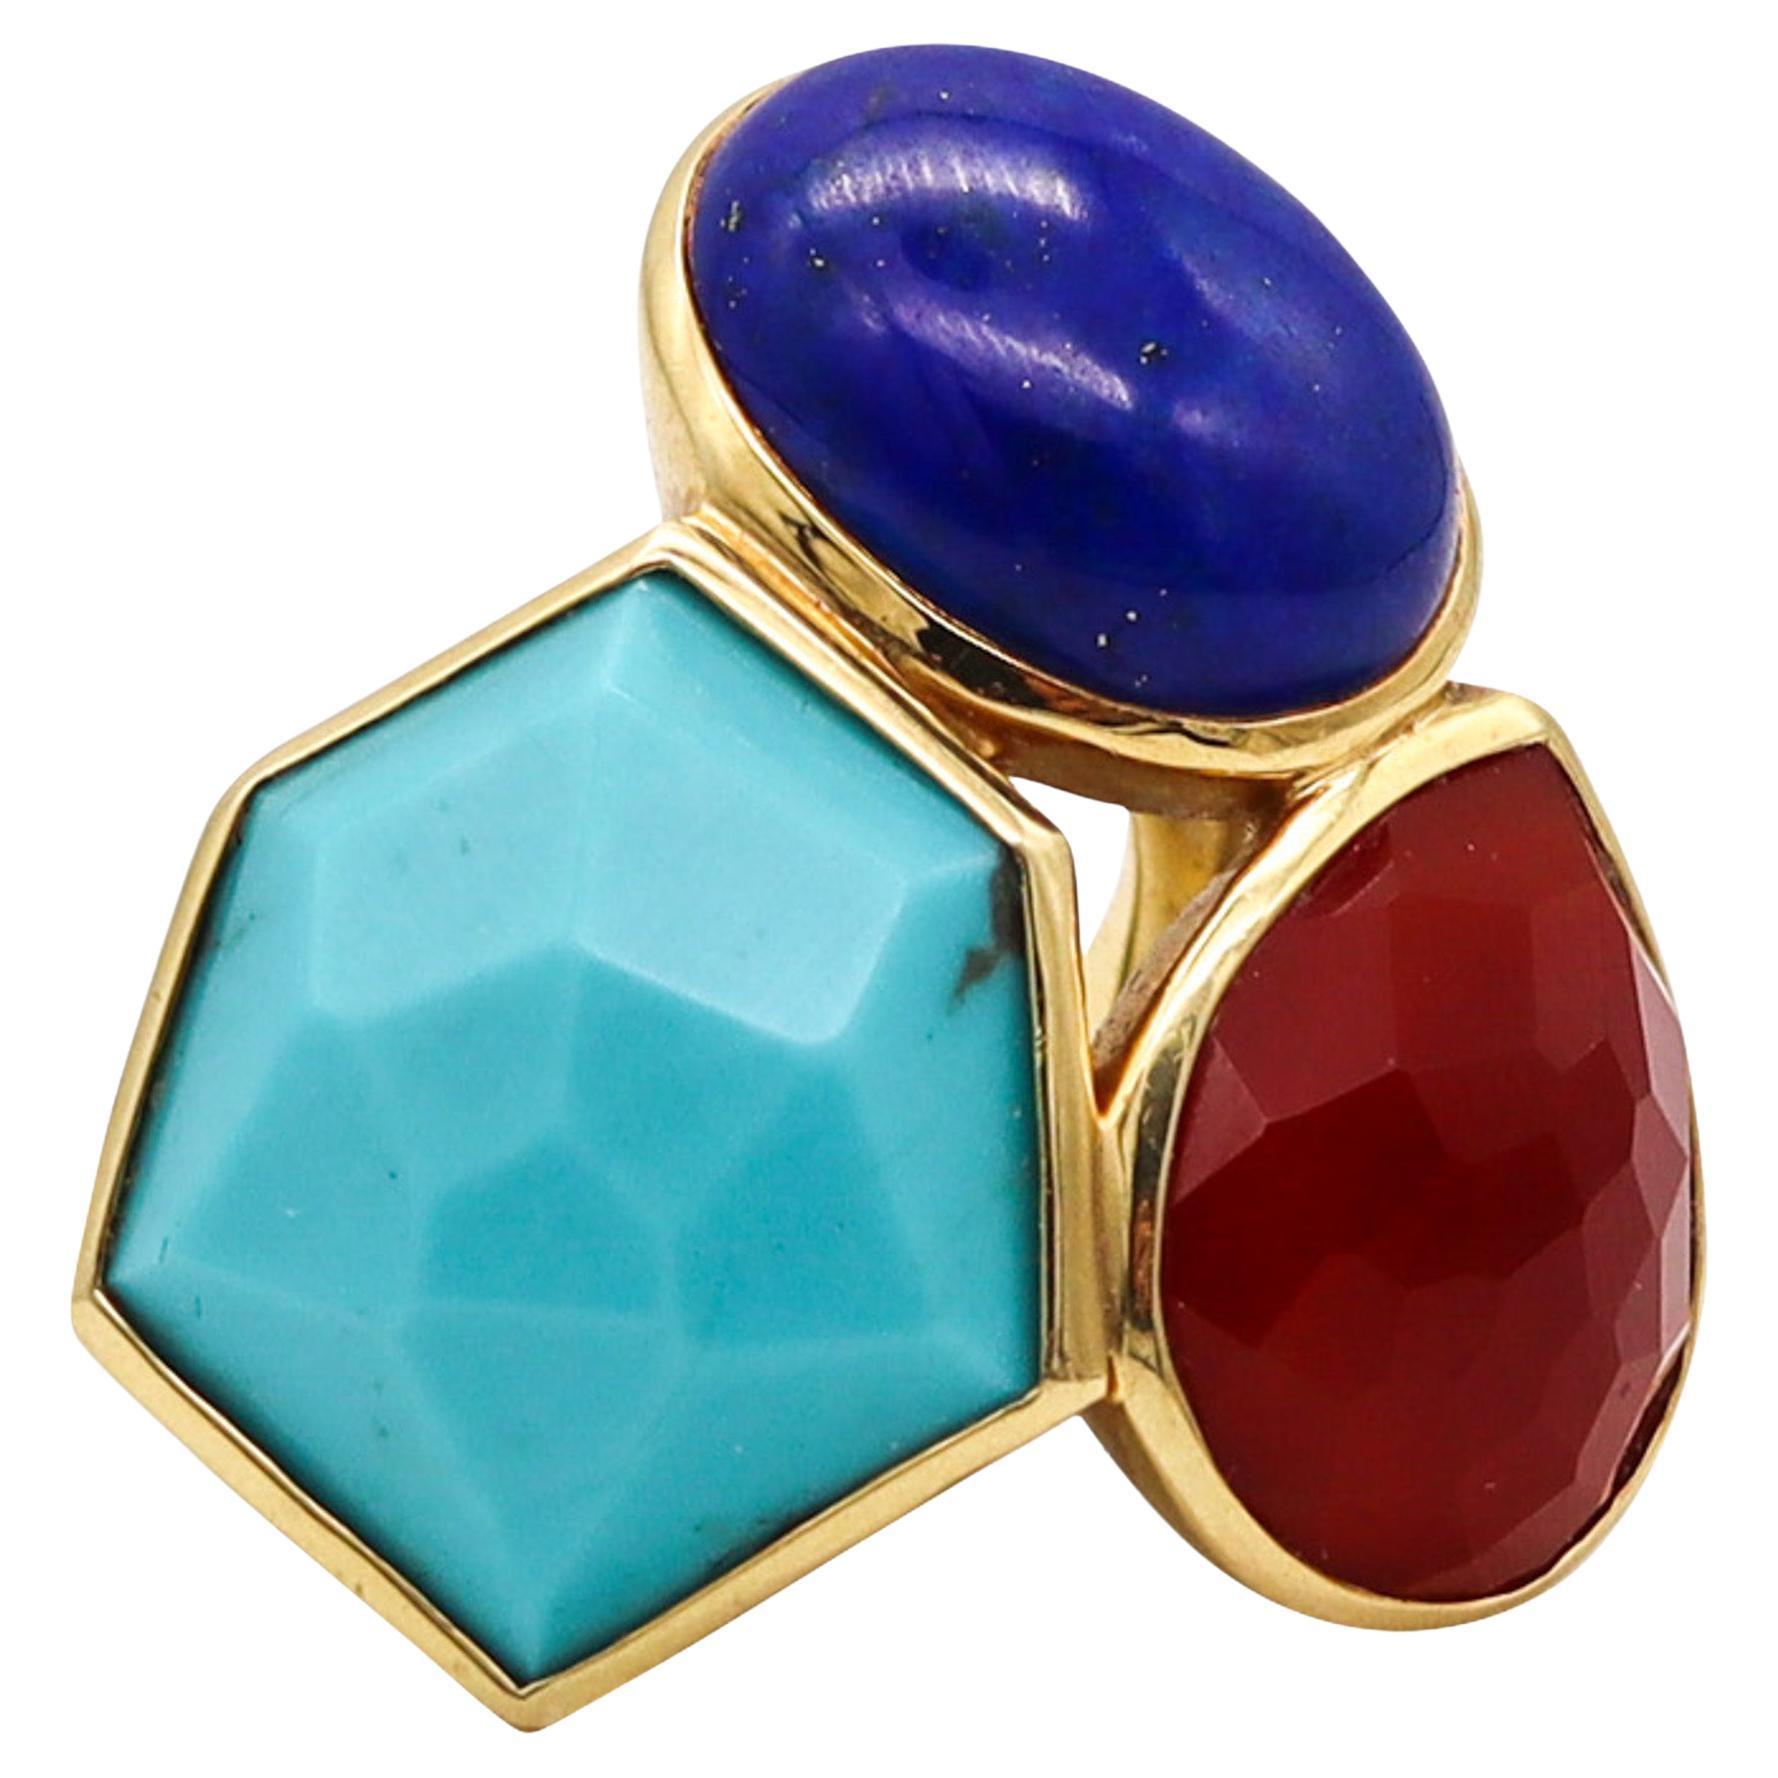 Ippolita Colorful Cocktail Ring In 18Kt Gold Turquoise Blue Lapis And Carnelian